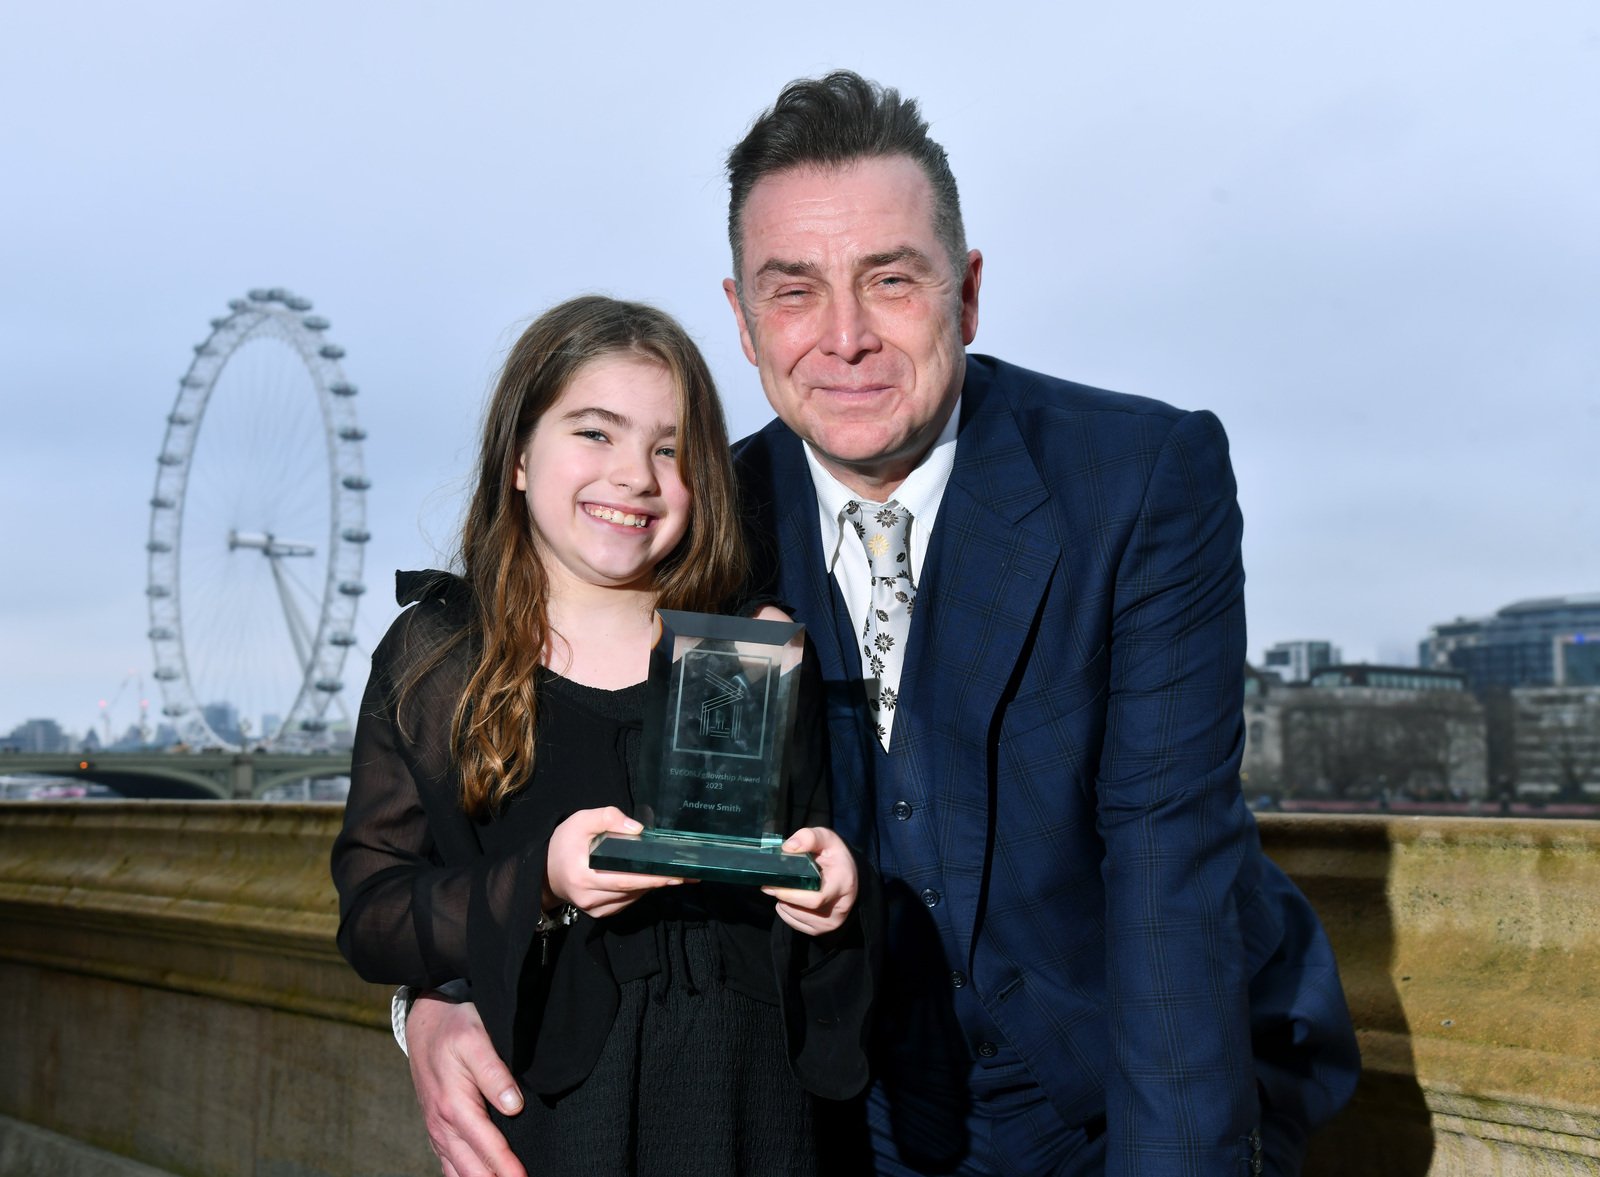 Andrew Smith stands alongside his daughter who is holding the trophy in front of the London eye at the EVCOM Fellowship Awards.